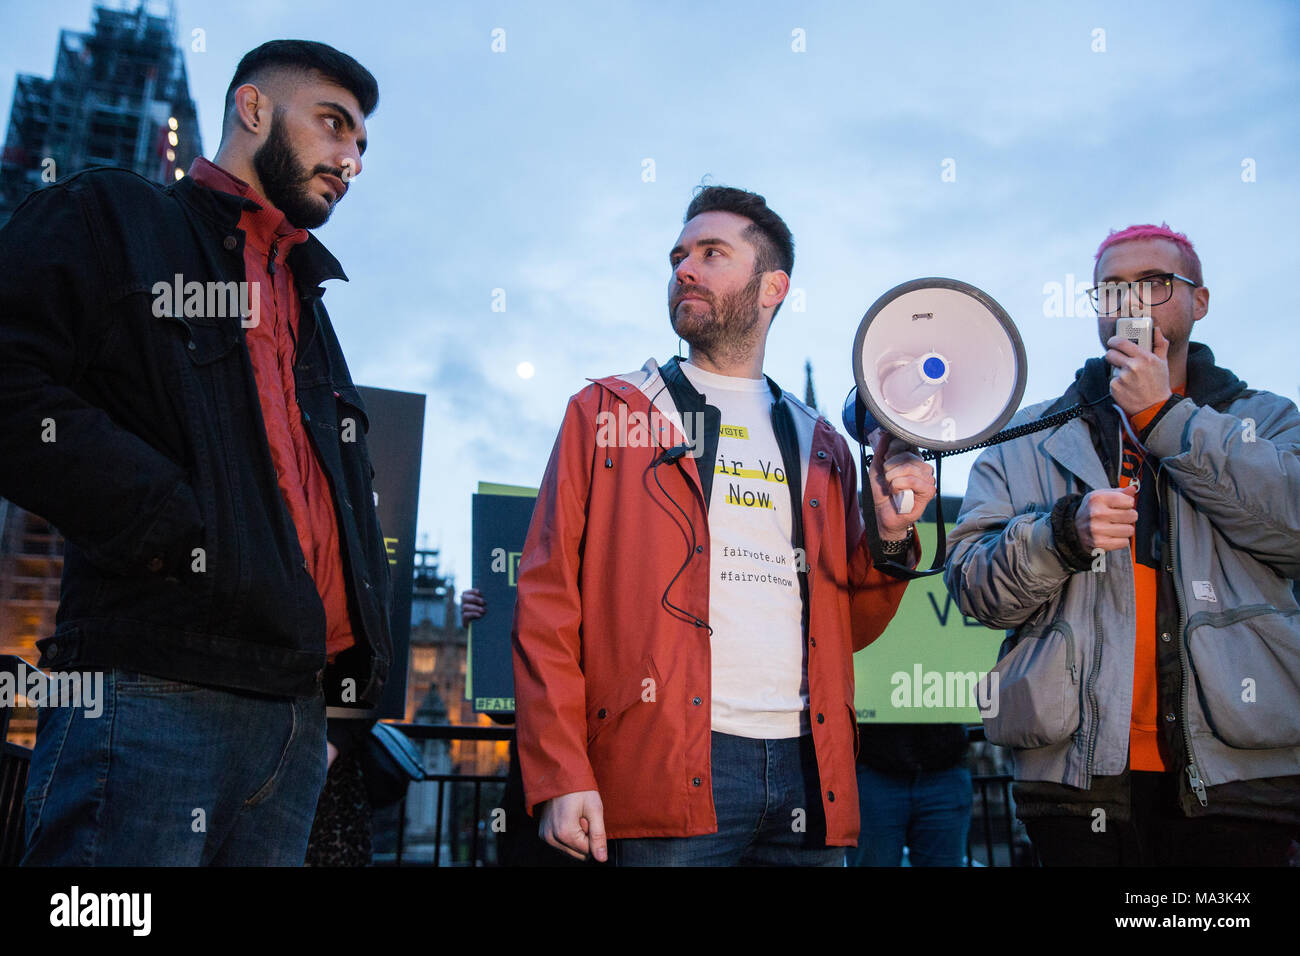 London, UK. 29th March, 2018. Cambridge Analytica whistleblower Christopher Wylie introduces Vote Leave whistleblower Shahmir Sanni at a rally in Parliament Square organised by the Fair Vote Project, which was set up to support whistleblowers like them and to ensure that evidence of unfair voting by either side in the referendum regarding the UK’s membership of the European Union is exposed. Credit: Mark Kerrison/Alamy Live News Stock Photo